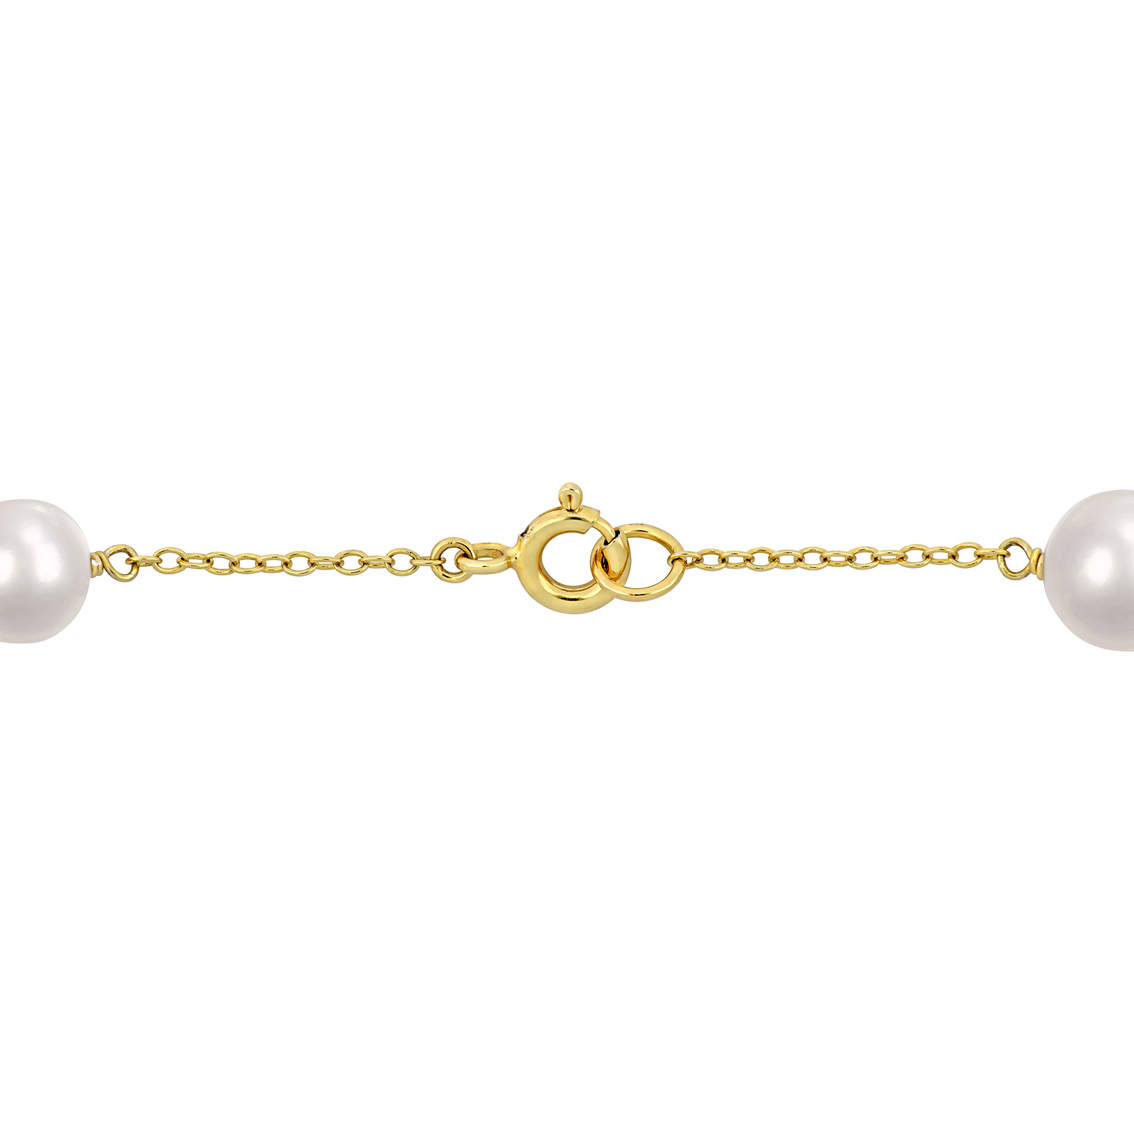 Sofia B. Yellow Gold Over Sterling Silver Freshwater Pearl Station Bracelet - Image 2 of 2